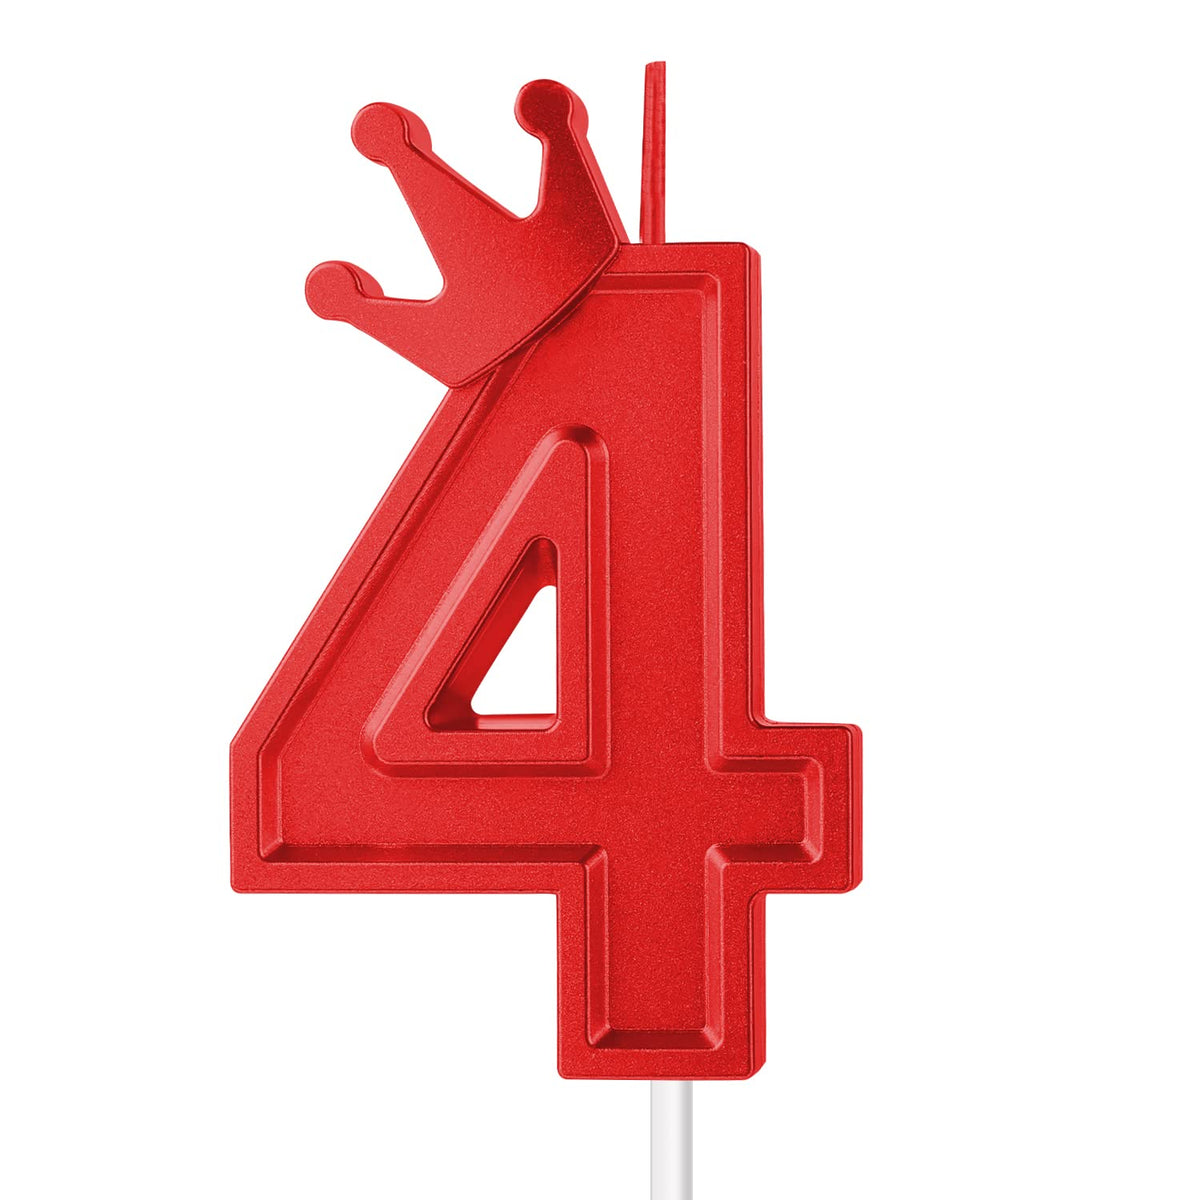 AIEX 3 Inch Birthday Number Candle, Large Birthday Candles 3D Number Candles for Birthday Cakes with Crown Decor Cake Topper Candle for Wedding Valentine Anniversary Festival Party (Red, 4)